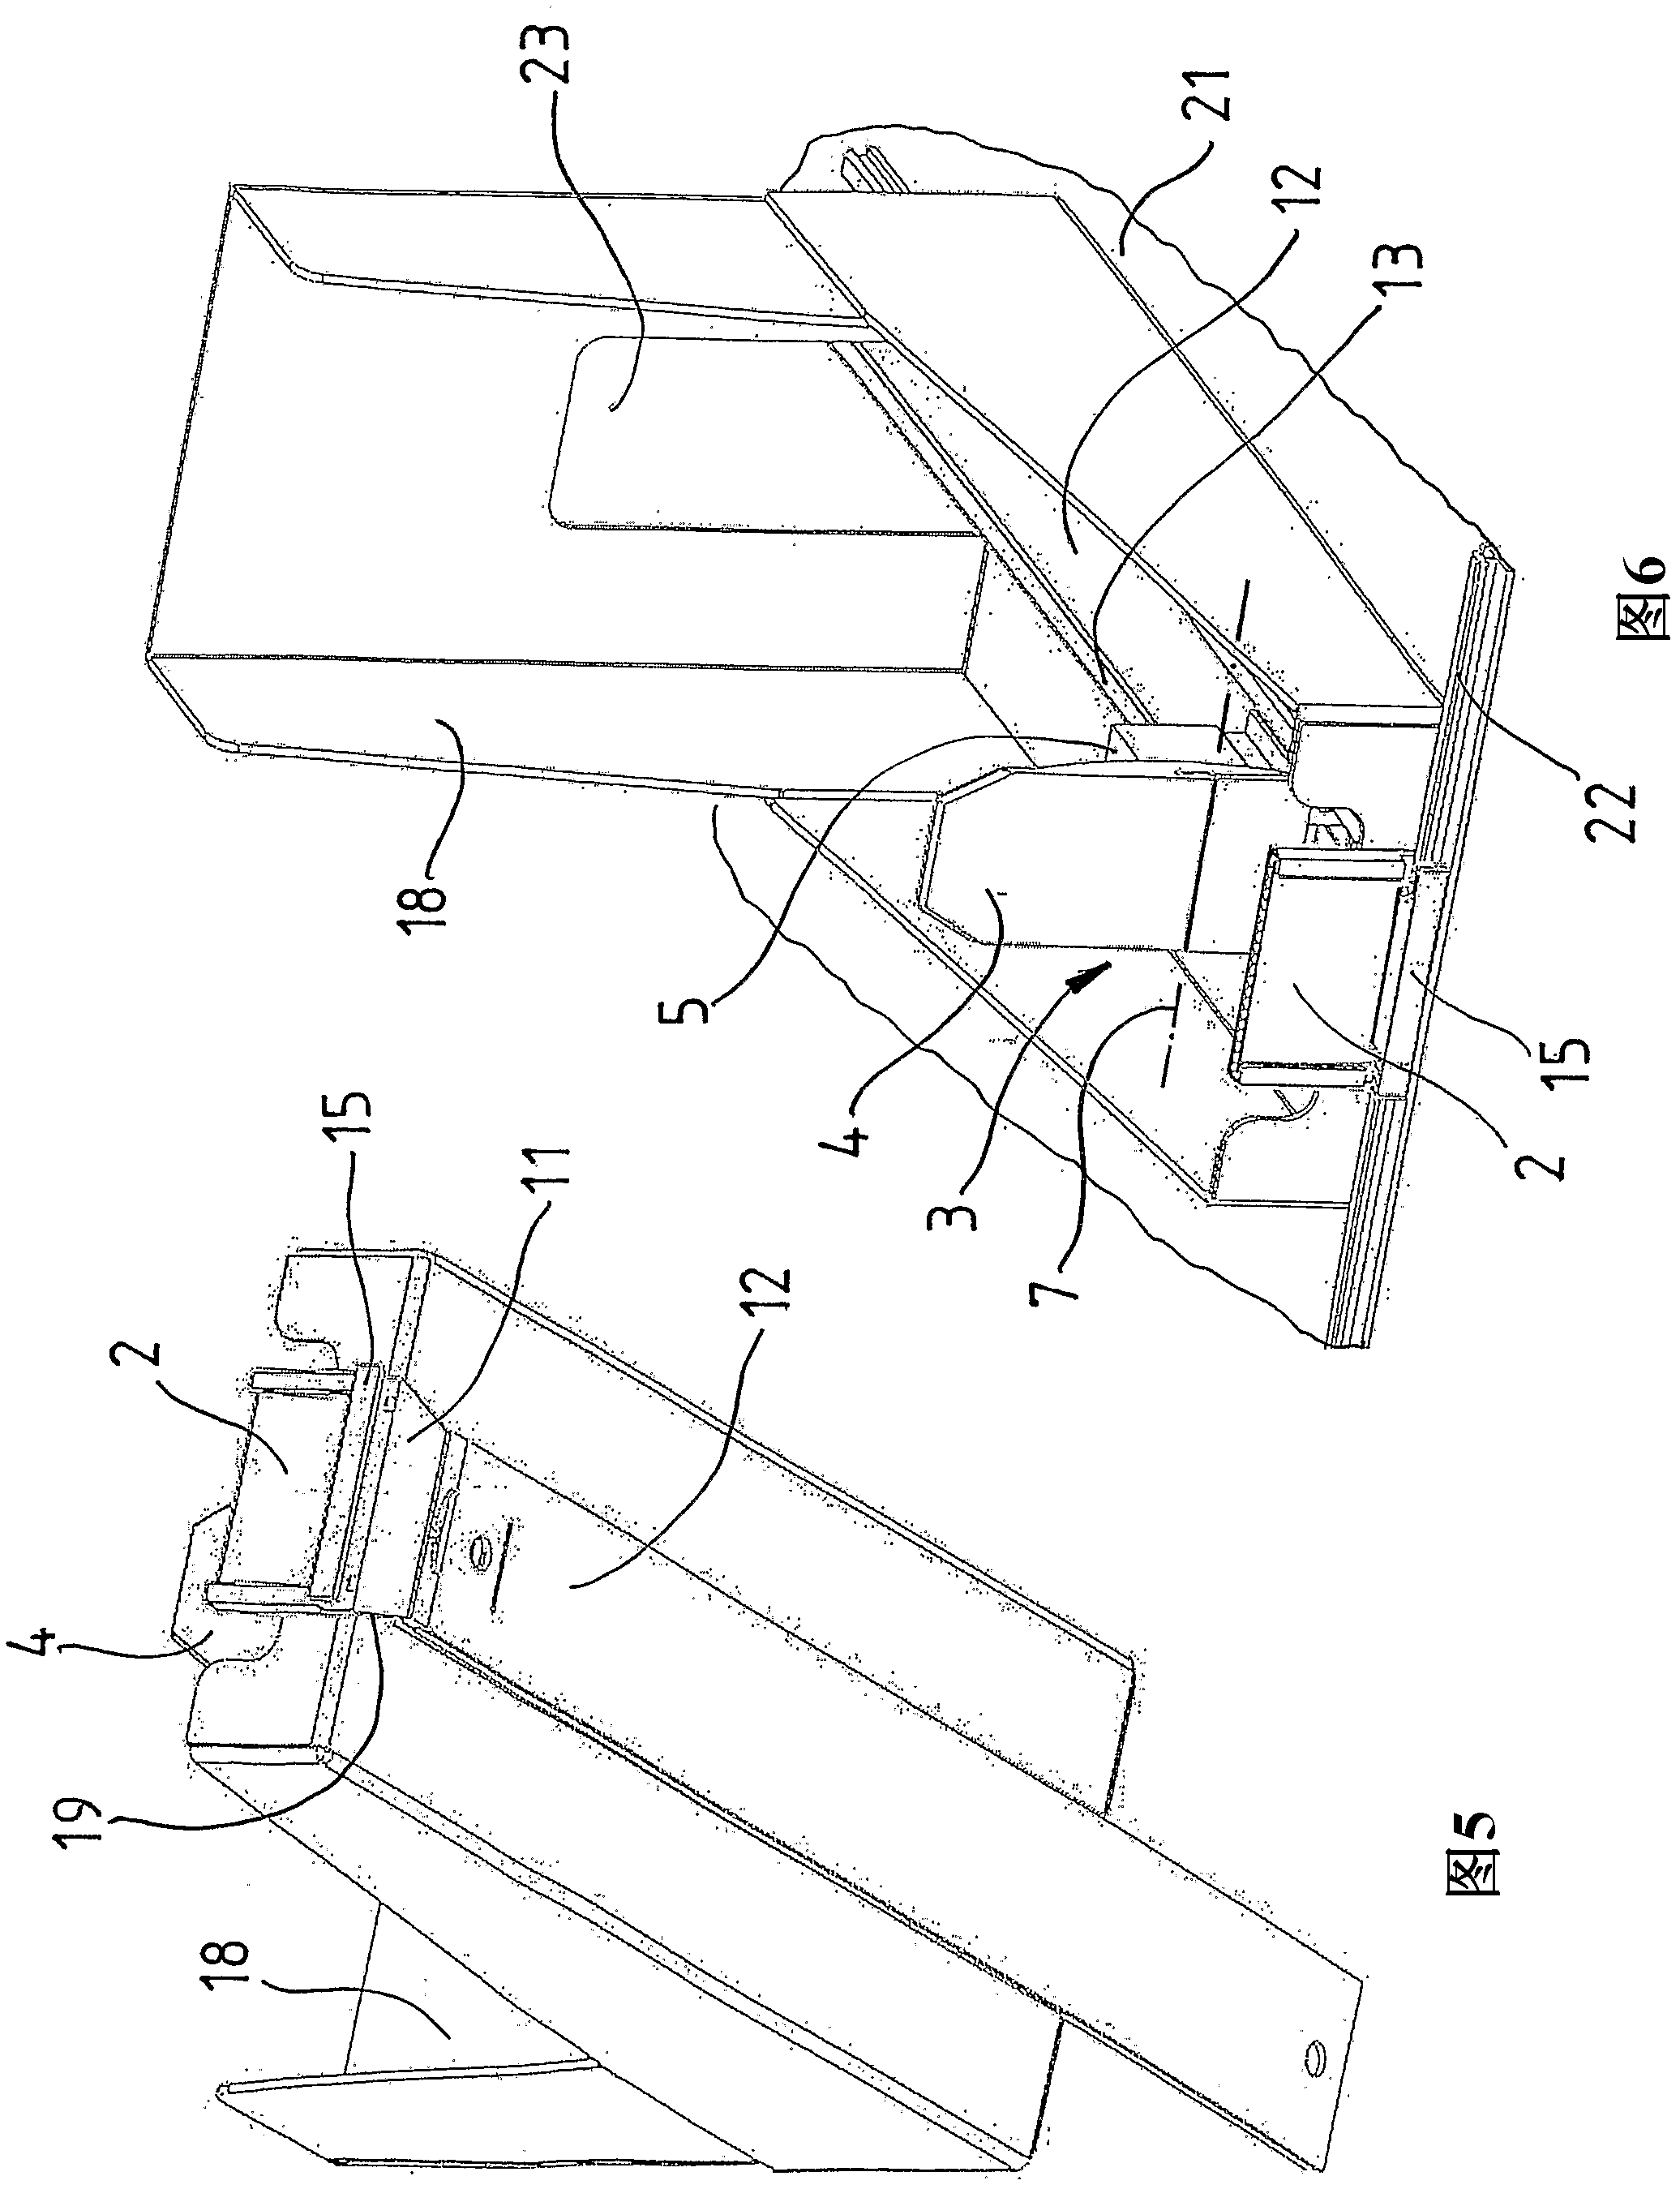 Goods advancing device